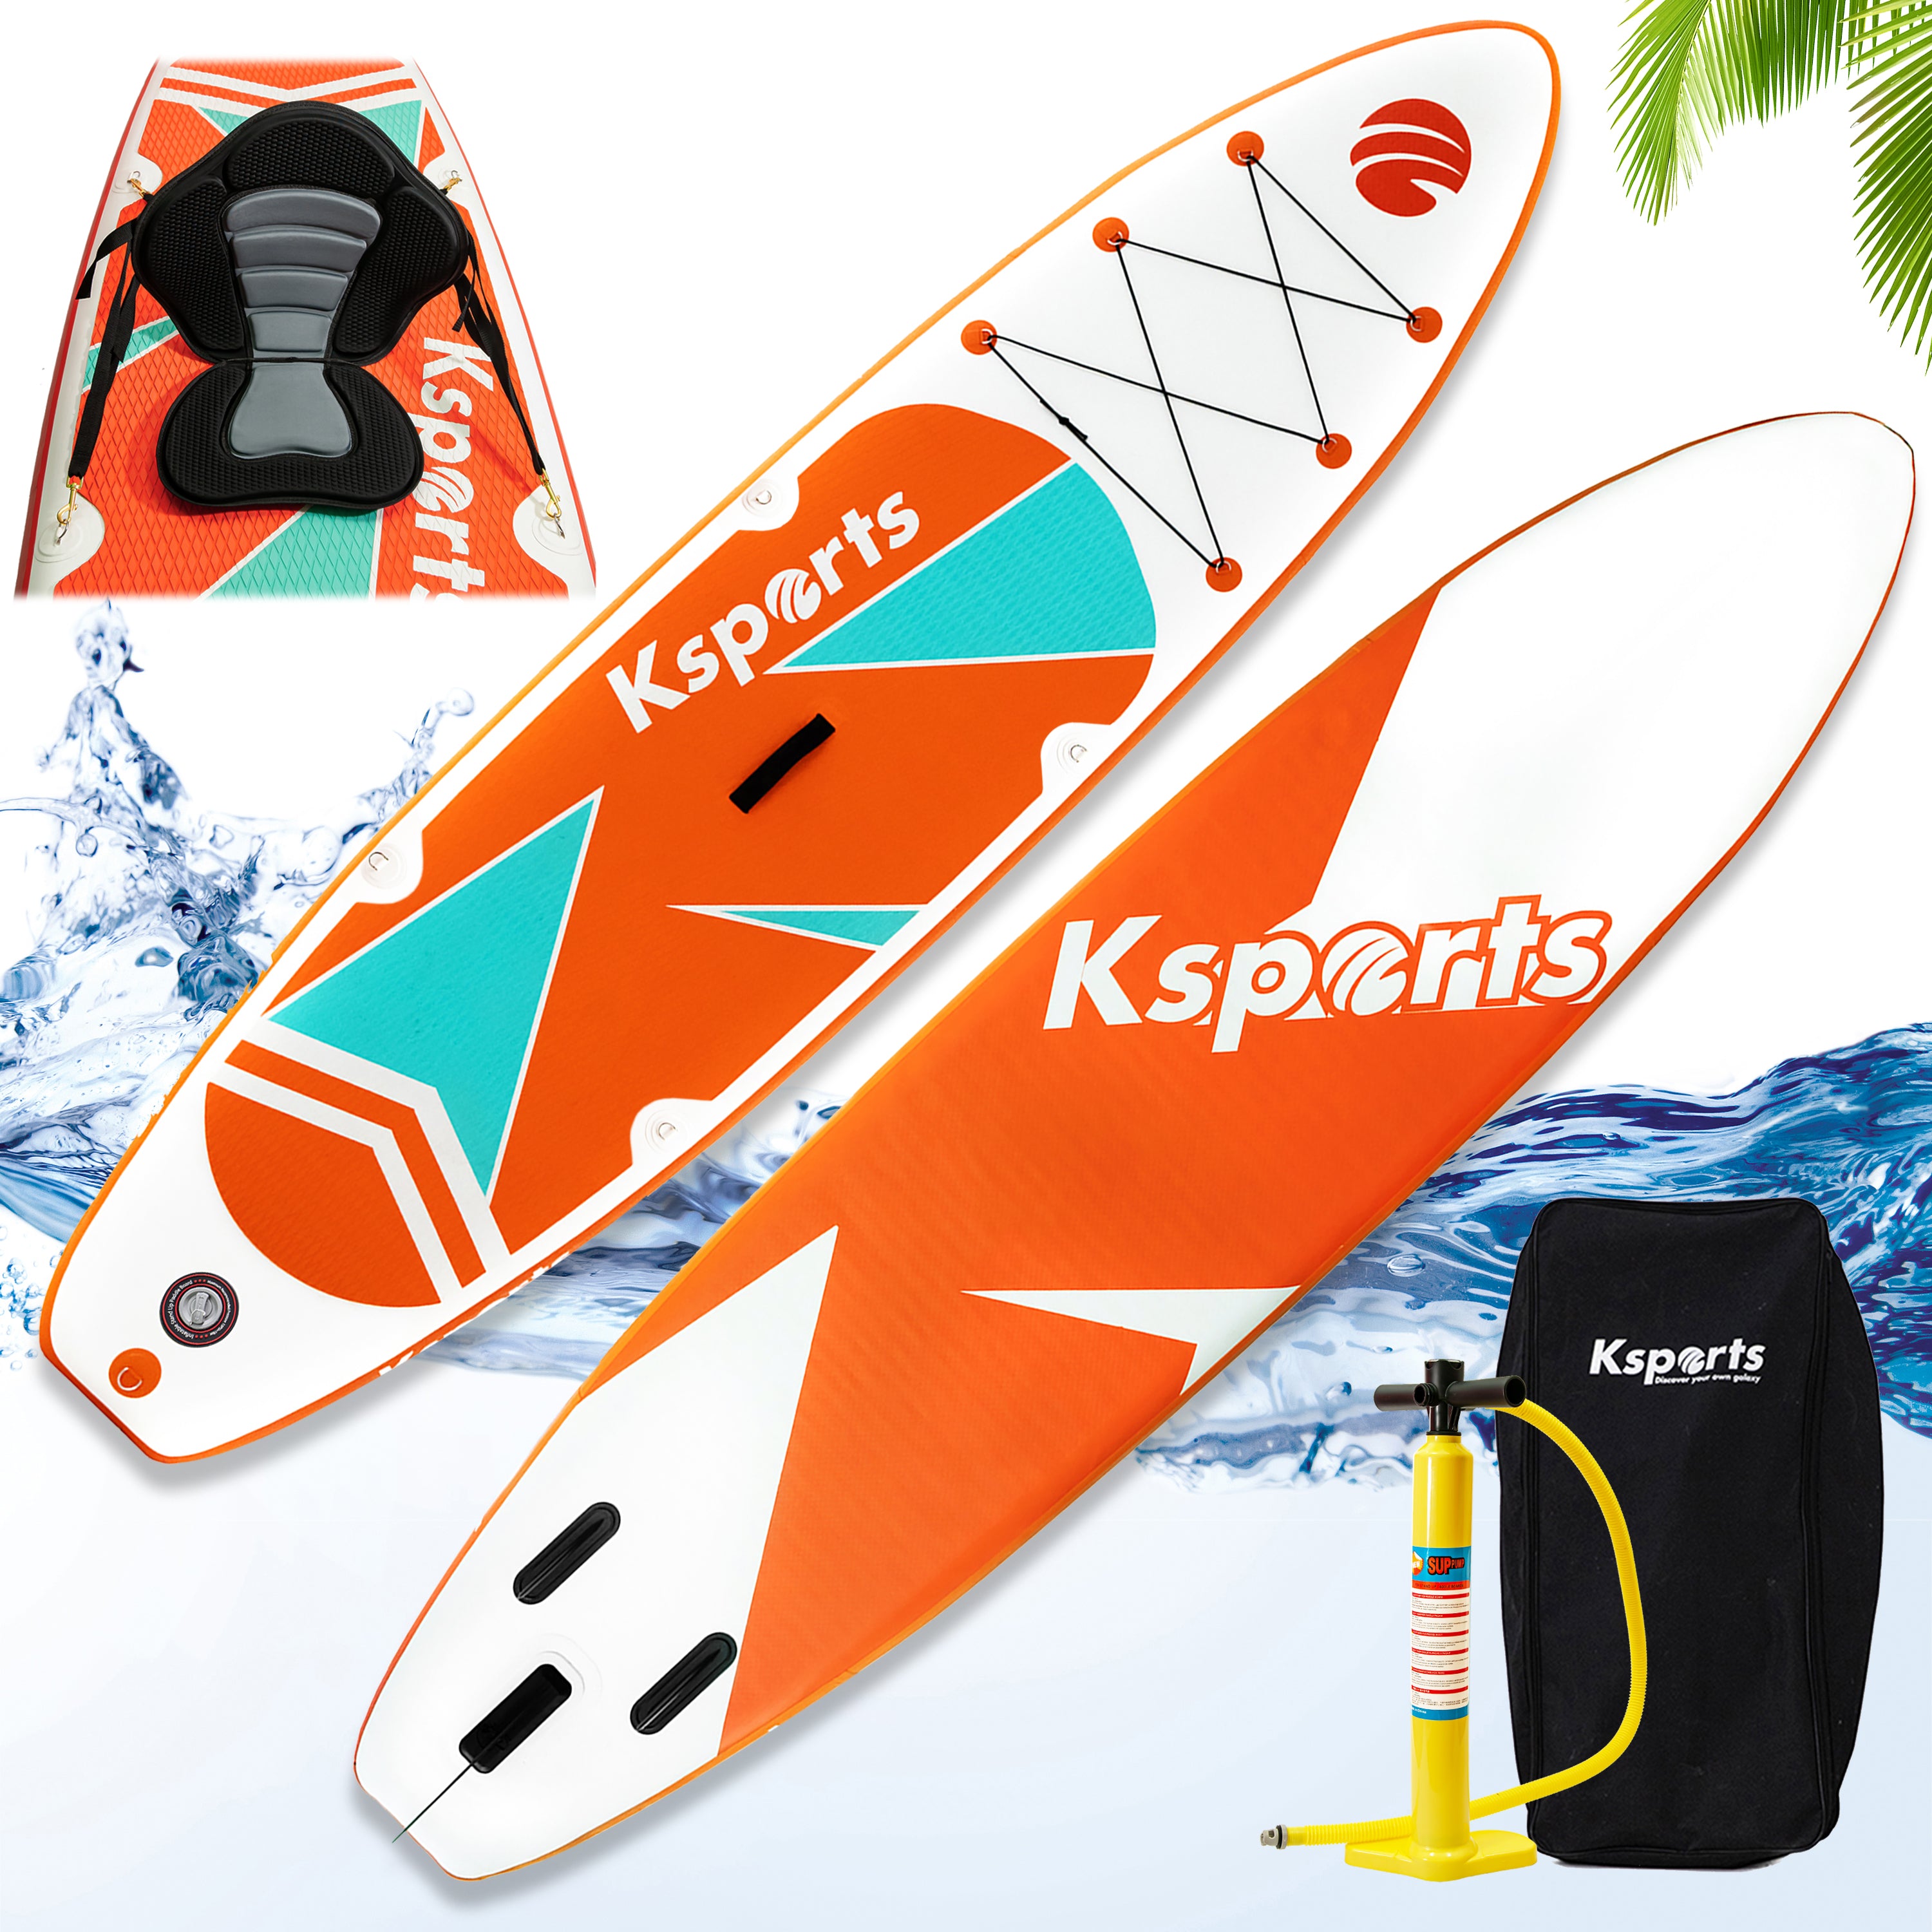 Ksports Inflatable Stand Up Paddle Board Orange (10.6ftⅹ32inⅹ6in)